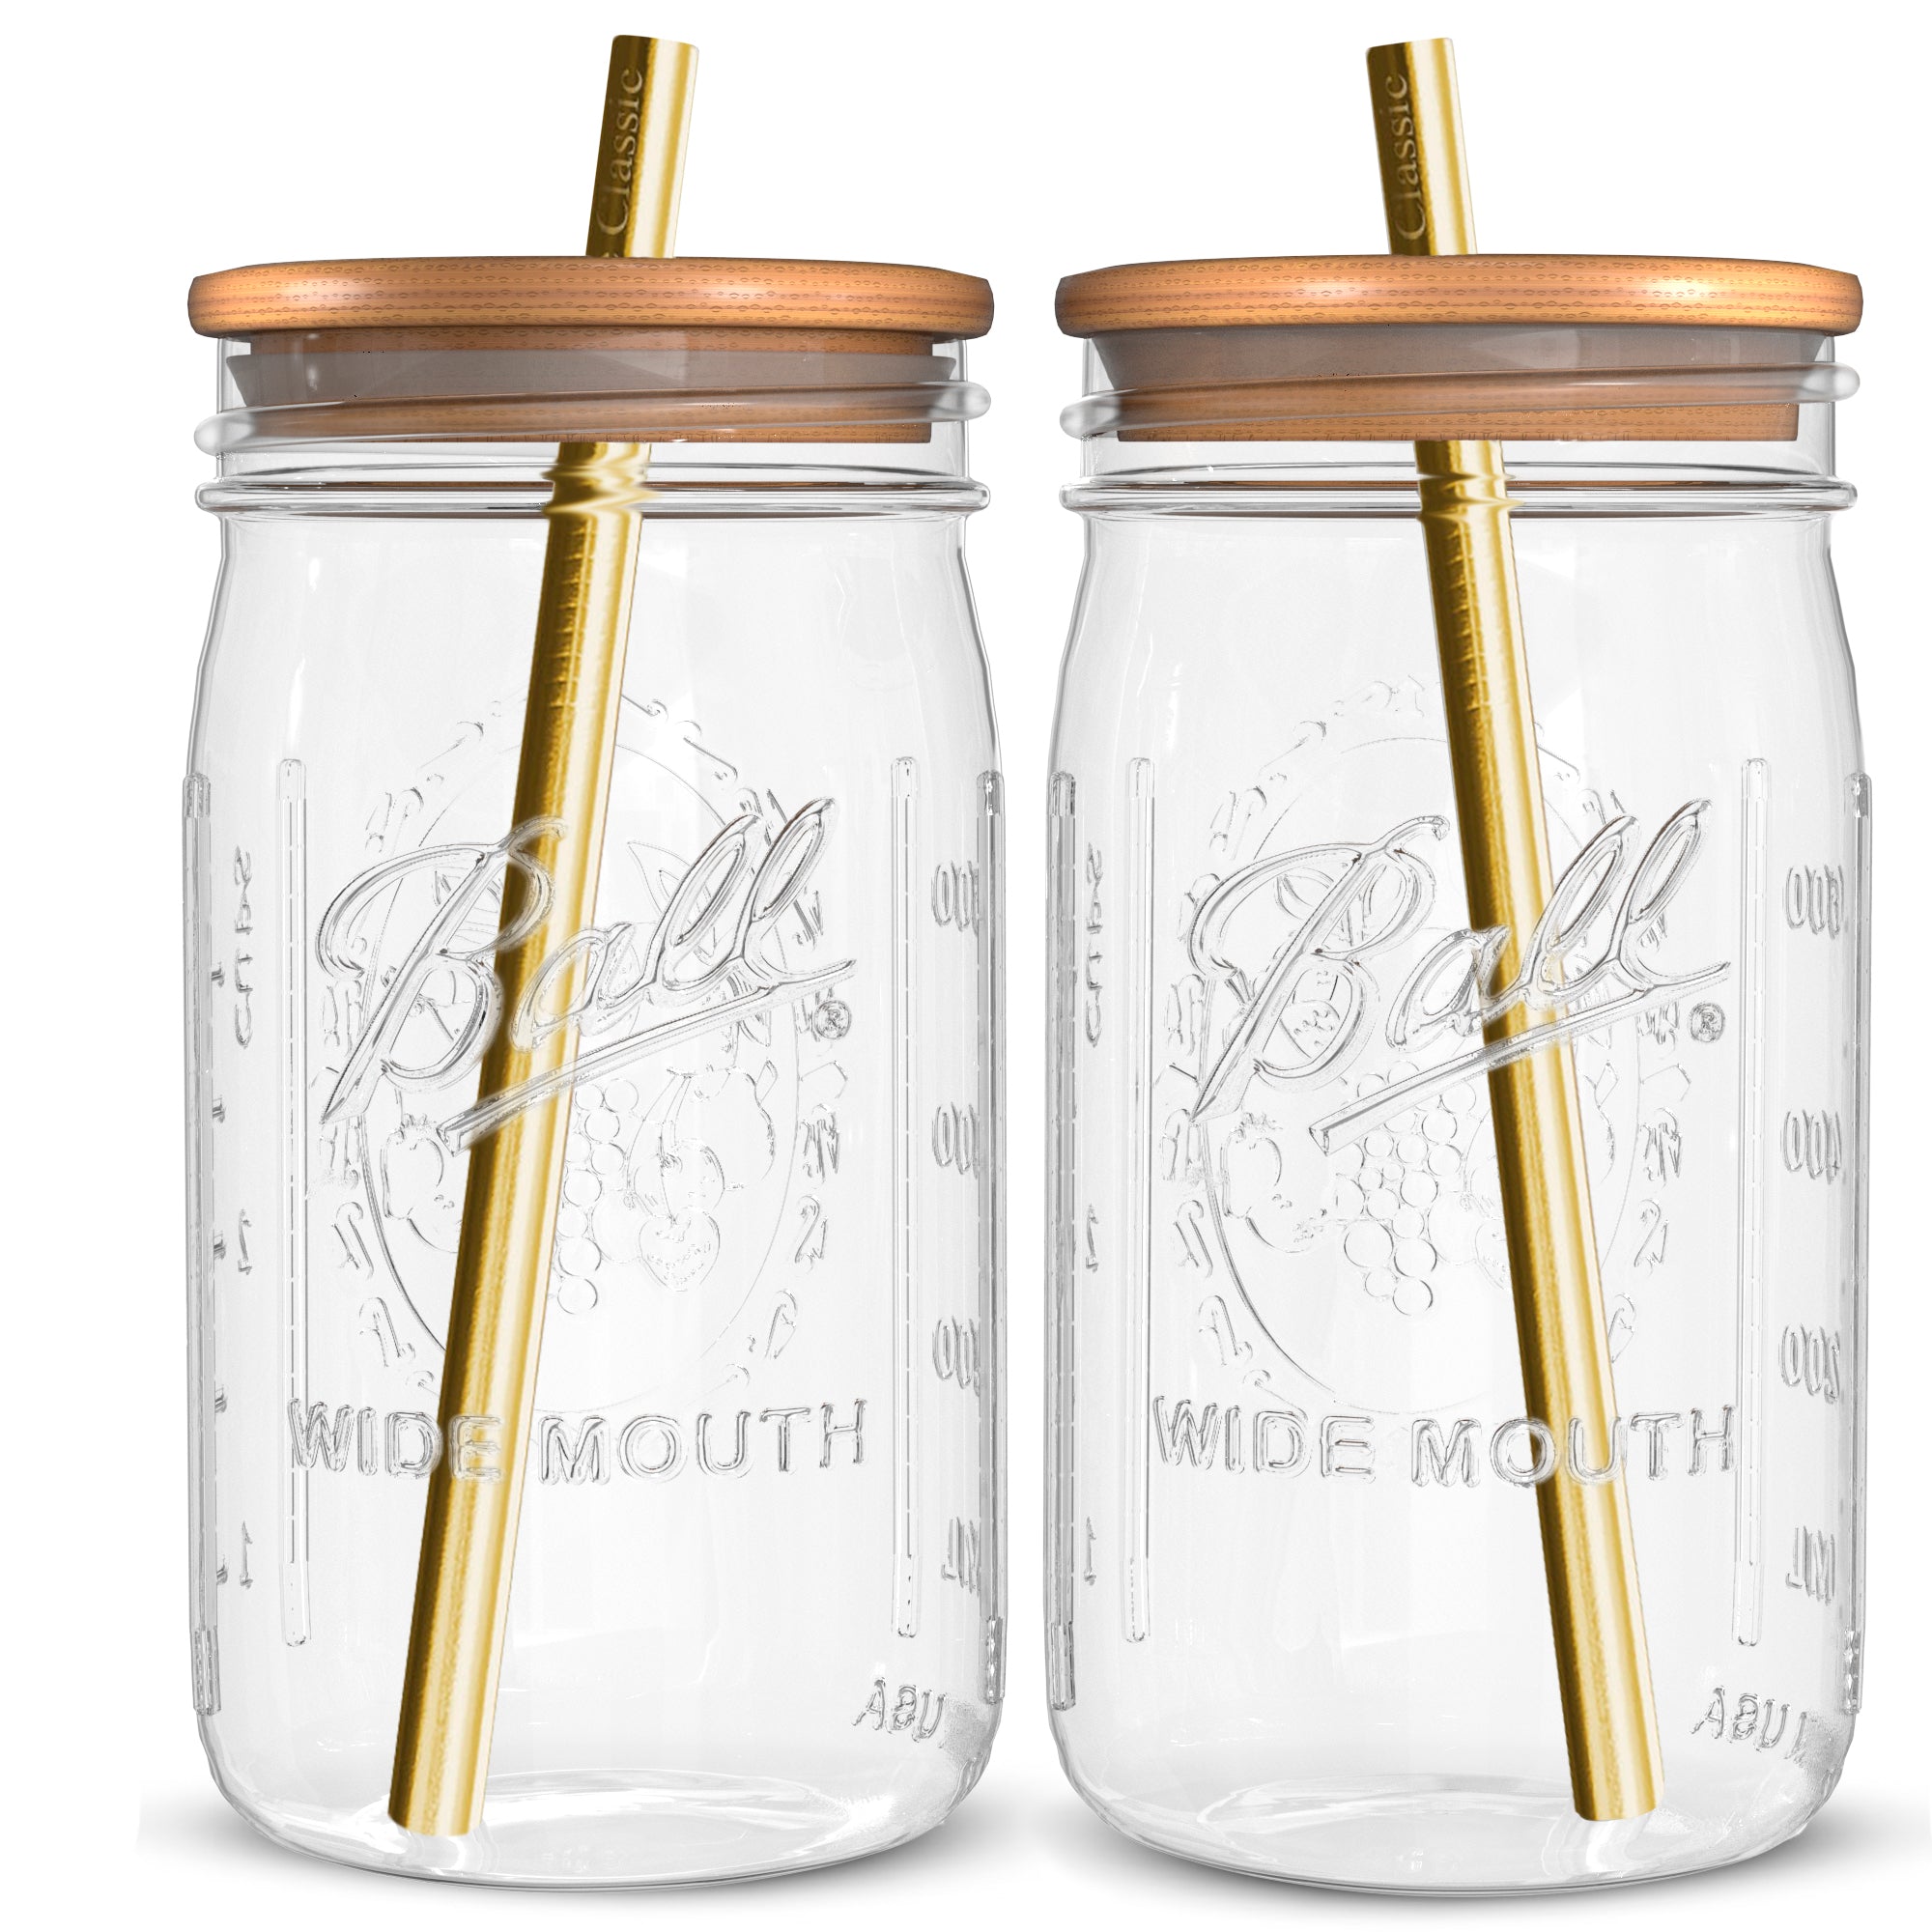 Reusable Boba Bubble Tea & Smoothie Cups - 2 Glass Wide Mouth 32 oz Mason  Jars with Bamboo Lids - 2 …See more Reusable Boba Bubble Tea & Smoothie  Cups